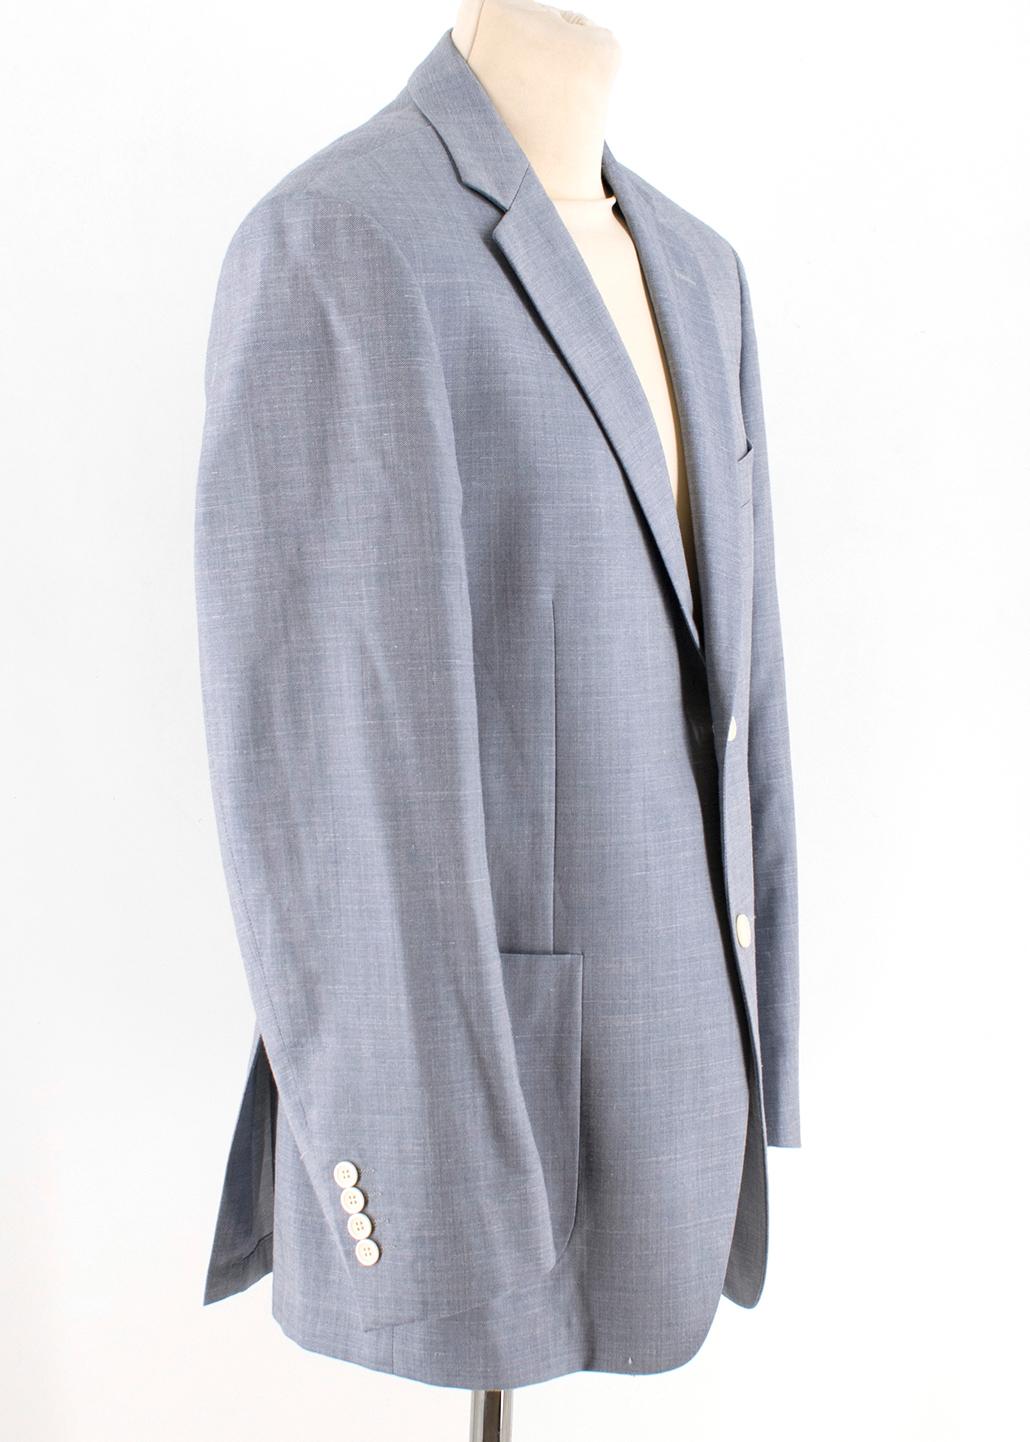 Balmain Men's Blue Wool Blend Blazer 

Single breasted wool blend jacket, with white buttons,
Padded shoulders, 
Standard notch lapel, 
White button up cuffs,
Front centre chest pocket, 
Two front pockets, 
Double back vent, 
Three interior